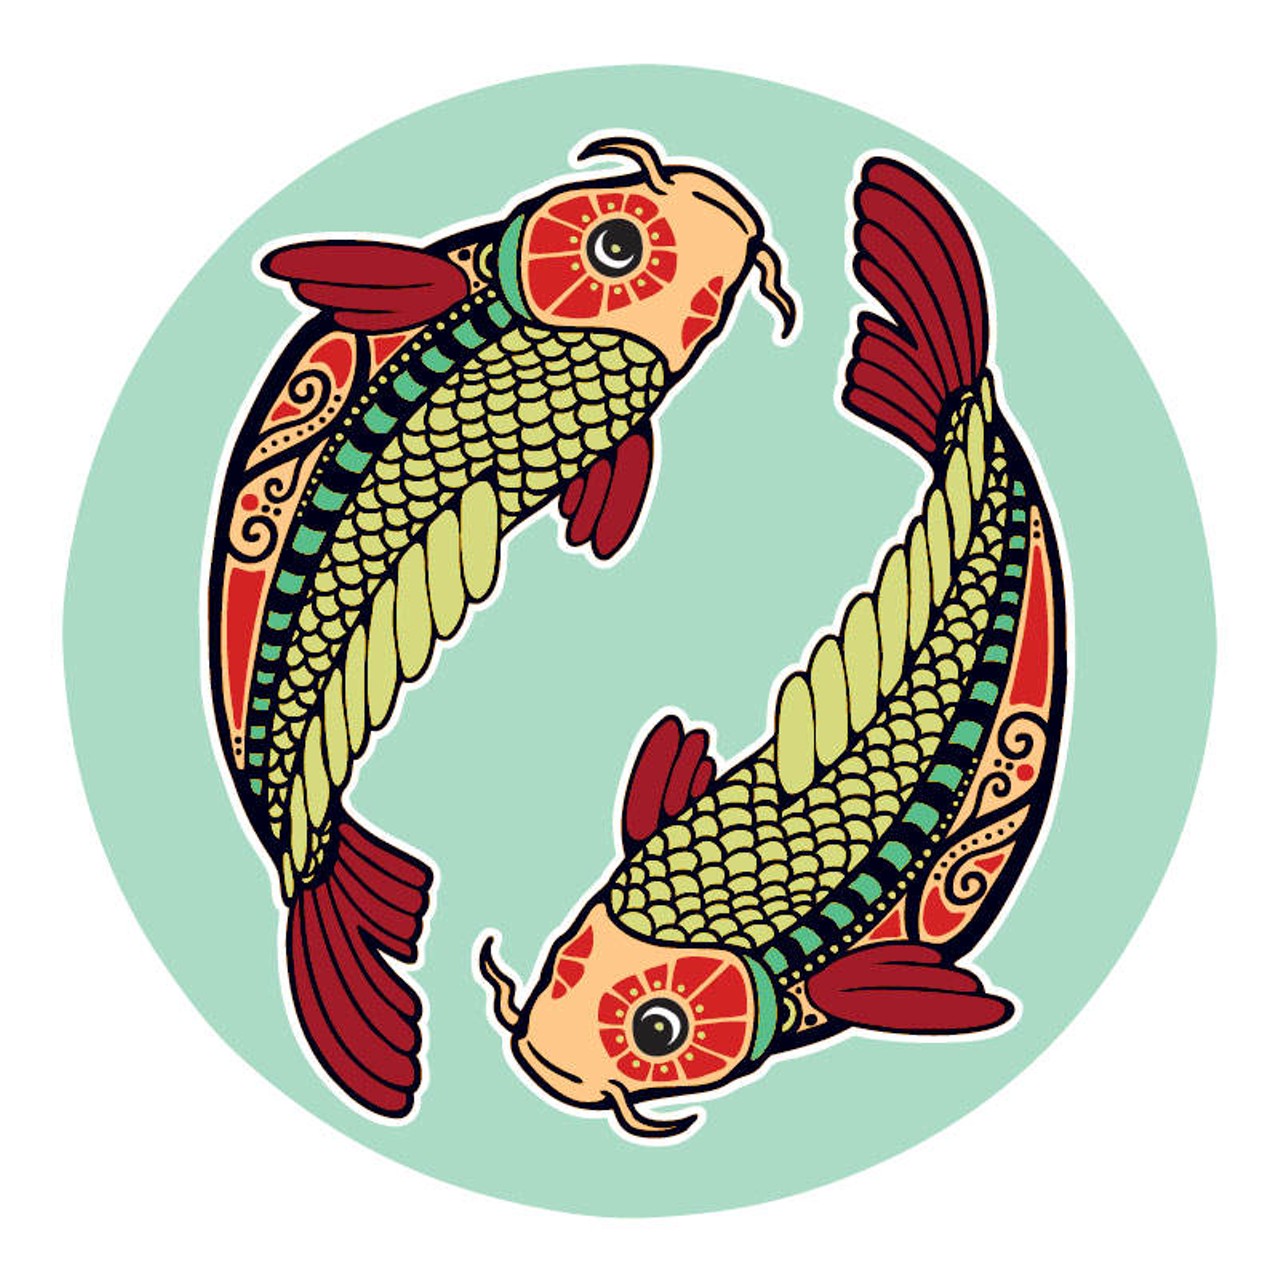 PISCES (Feb. 21-March 20): 
None of this looked like it was going to amount to anything &#151; now all of a sudden it seems to be working. You may not know how it happened but one thing&#146;s for sure, you had everything to do with it. Isn&#146;t it funny how when your efforts turn out to be worth it only then do you realize how much you brought to the situation? Now that things feel more balanced than they have in a long time, you have a chance to build upon whatever you&#146;ve created. If this is, in fact, where you&#146;re meant to be, it&#146;ll keep getting better. If you belong someplace else, you will know soon enough.